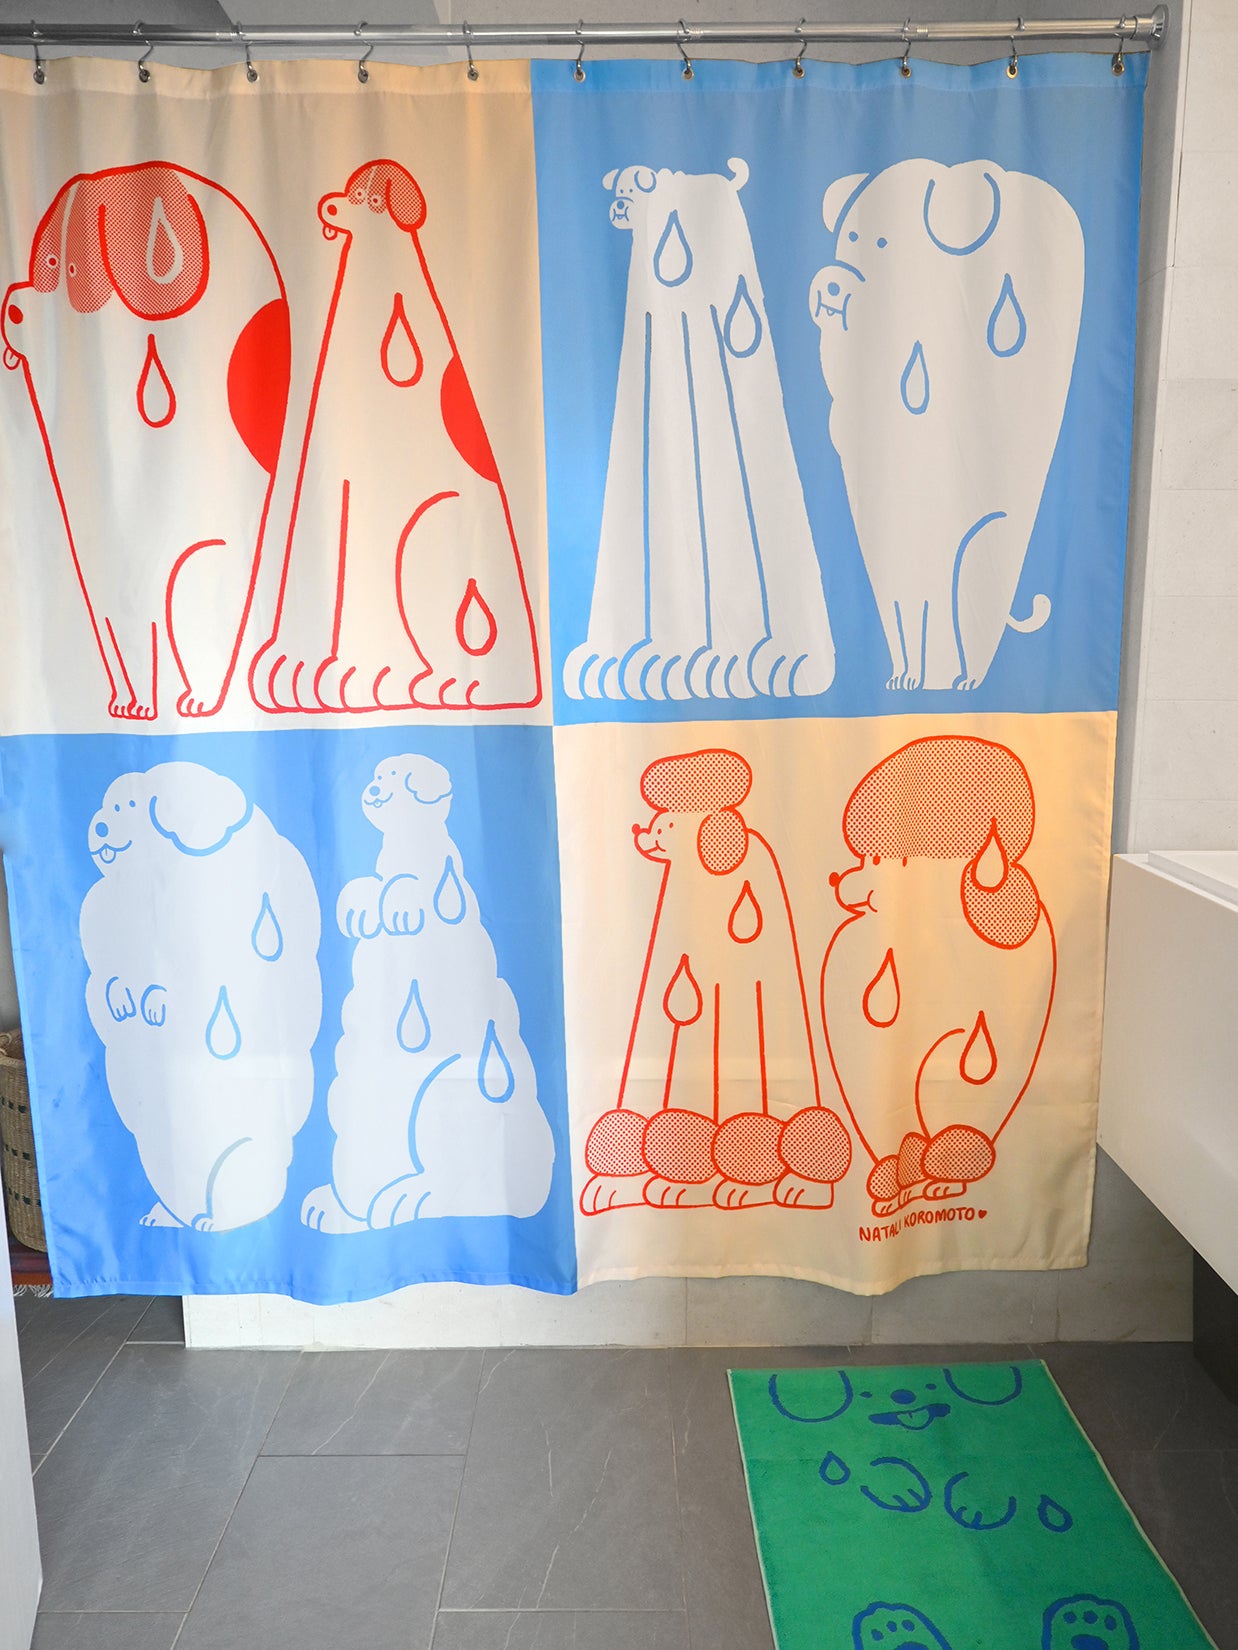 Part of the "Wet Dogs" bath collection by illustrator Natali Koromoto. "Wet Dogs" shower curtain.